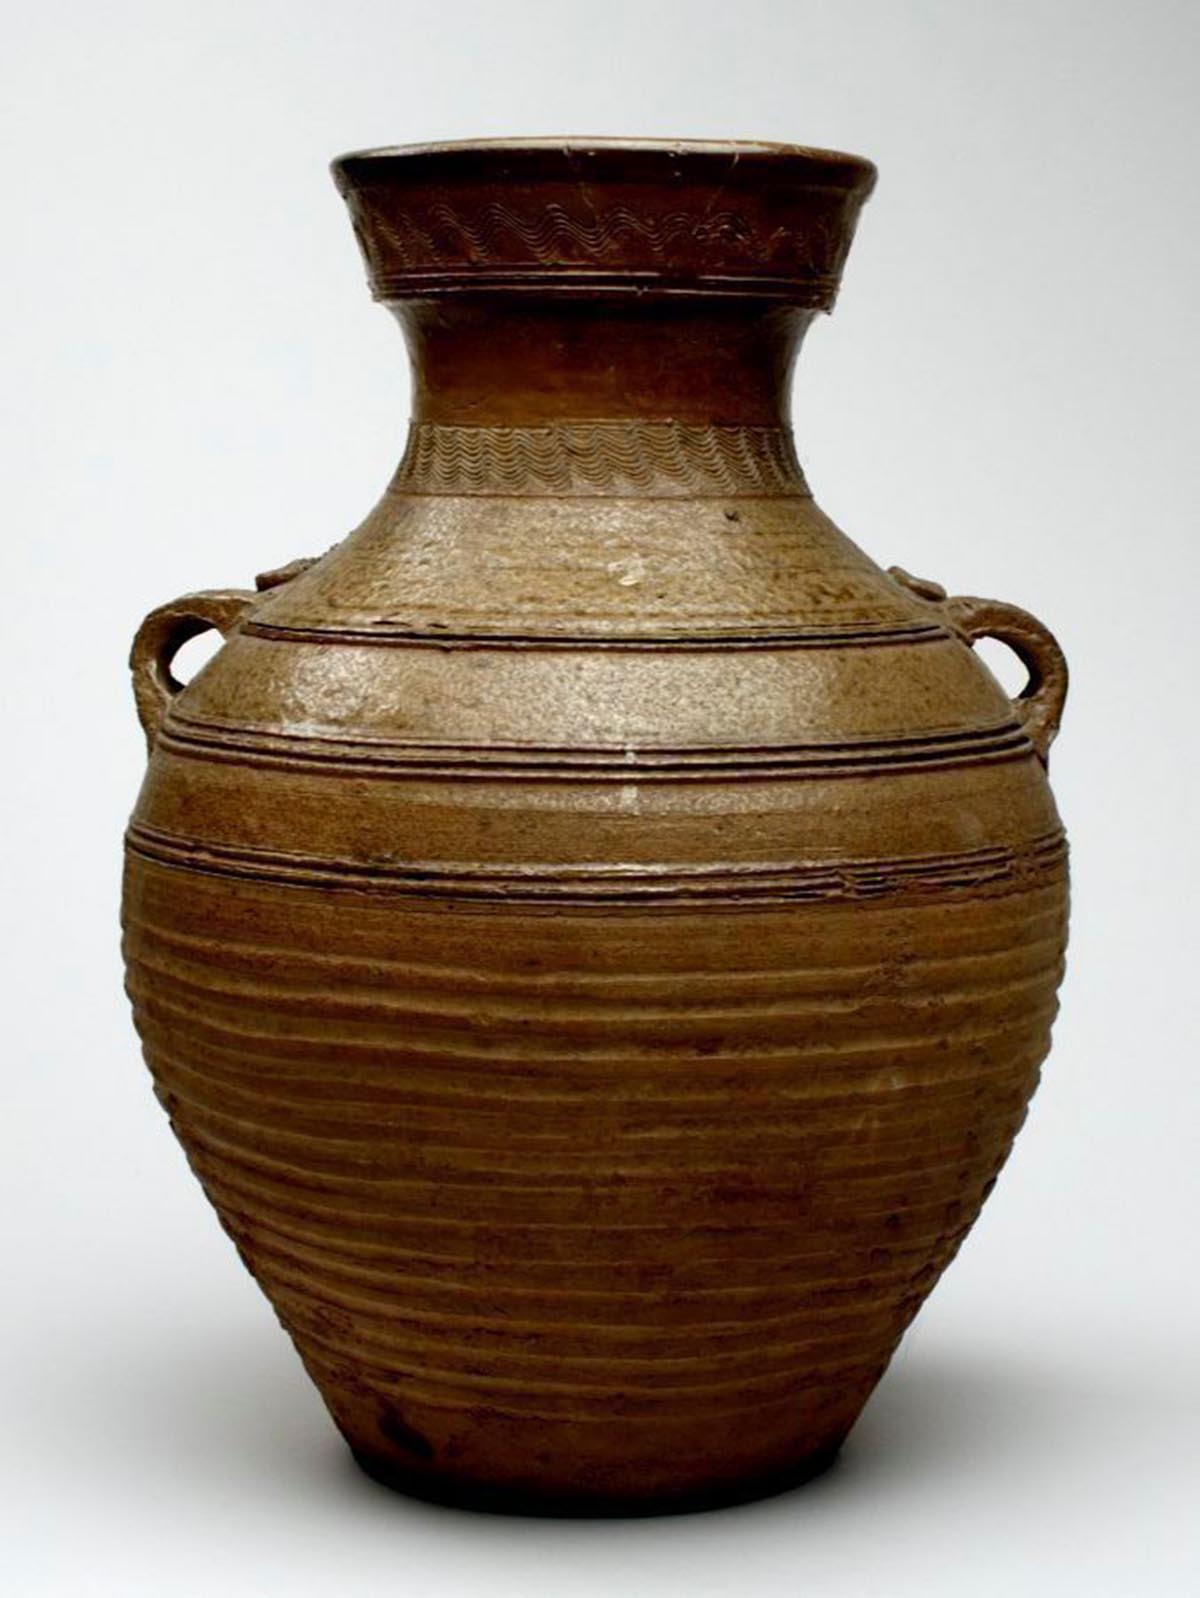 A earth-toned ceramic vase with small handles below the neck. 